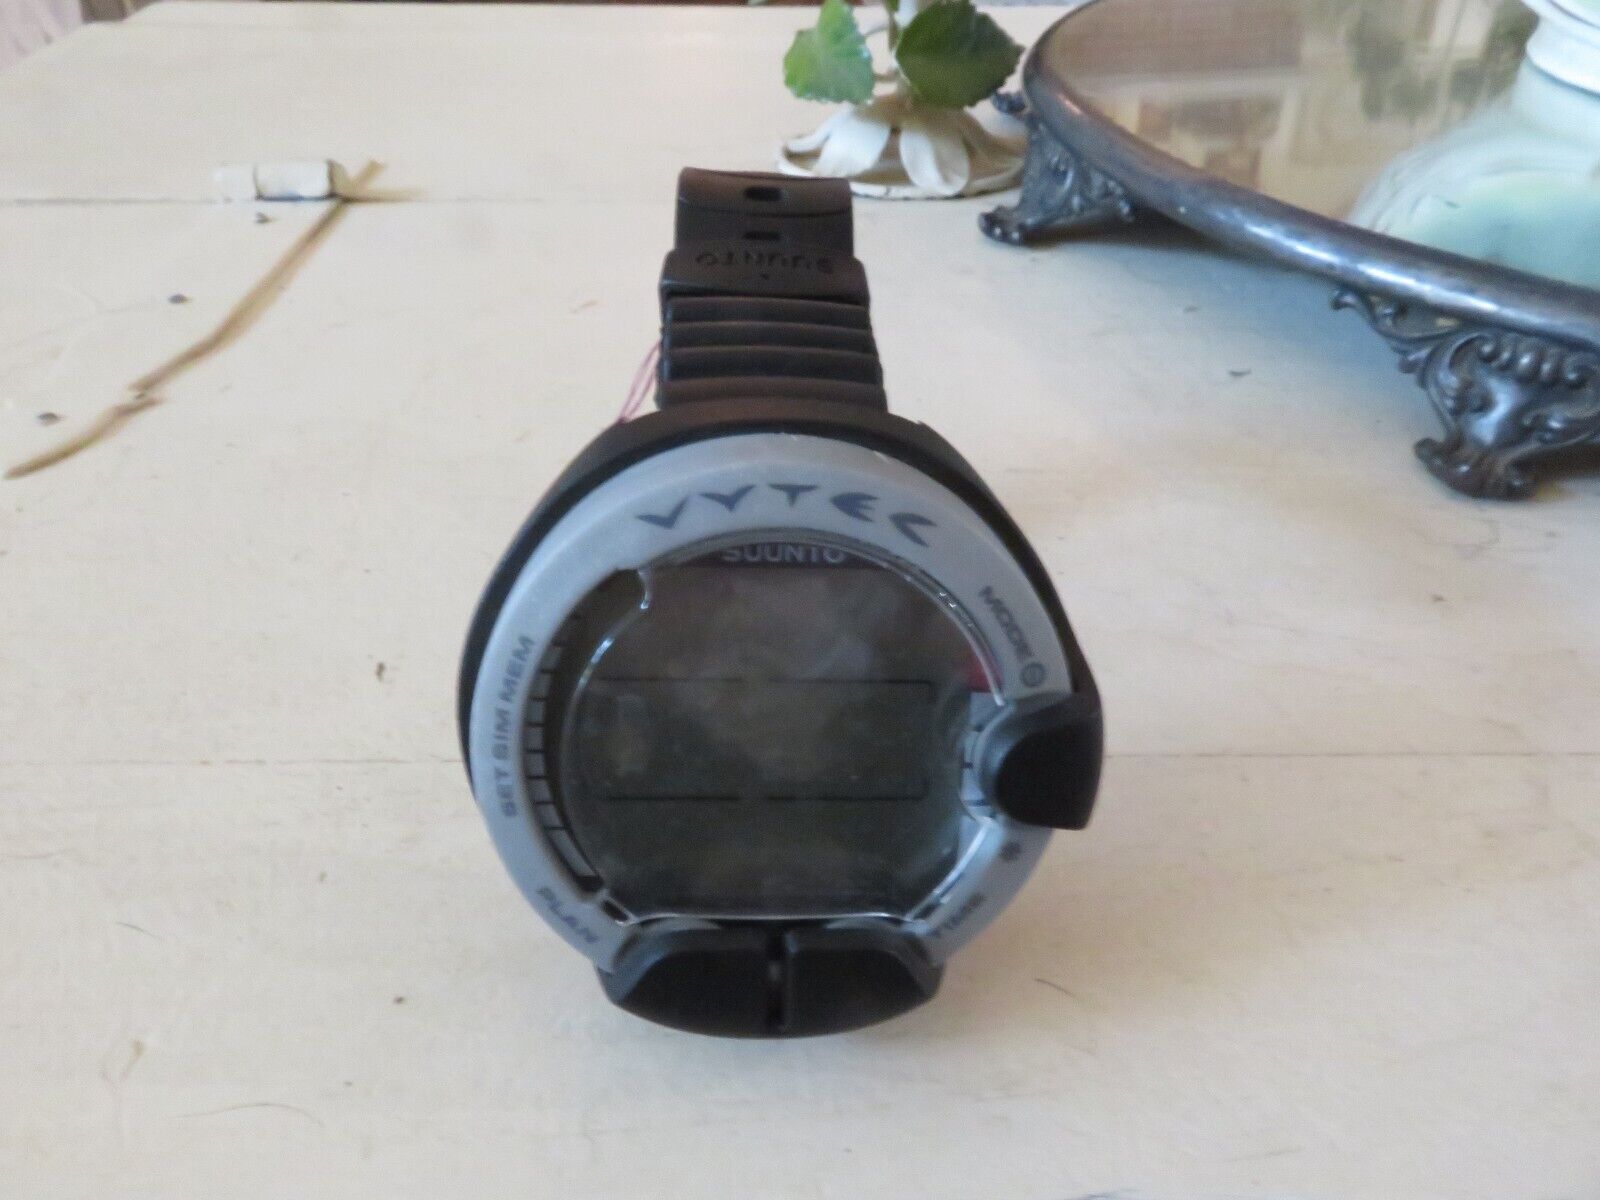 Vintage Huge & Chunky Suunto Finland Watch NO Charger JUST THE WATCH